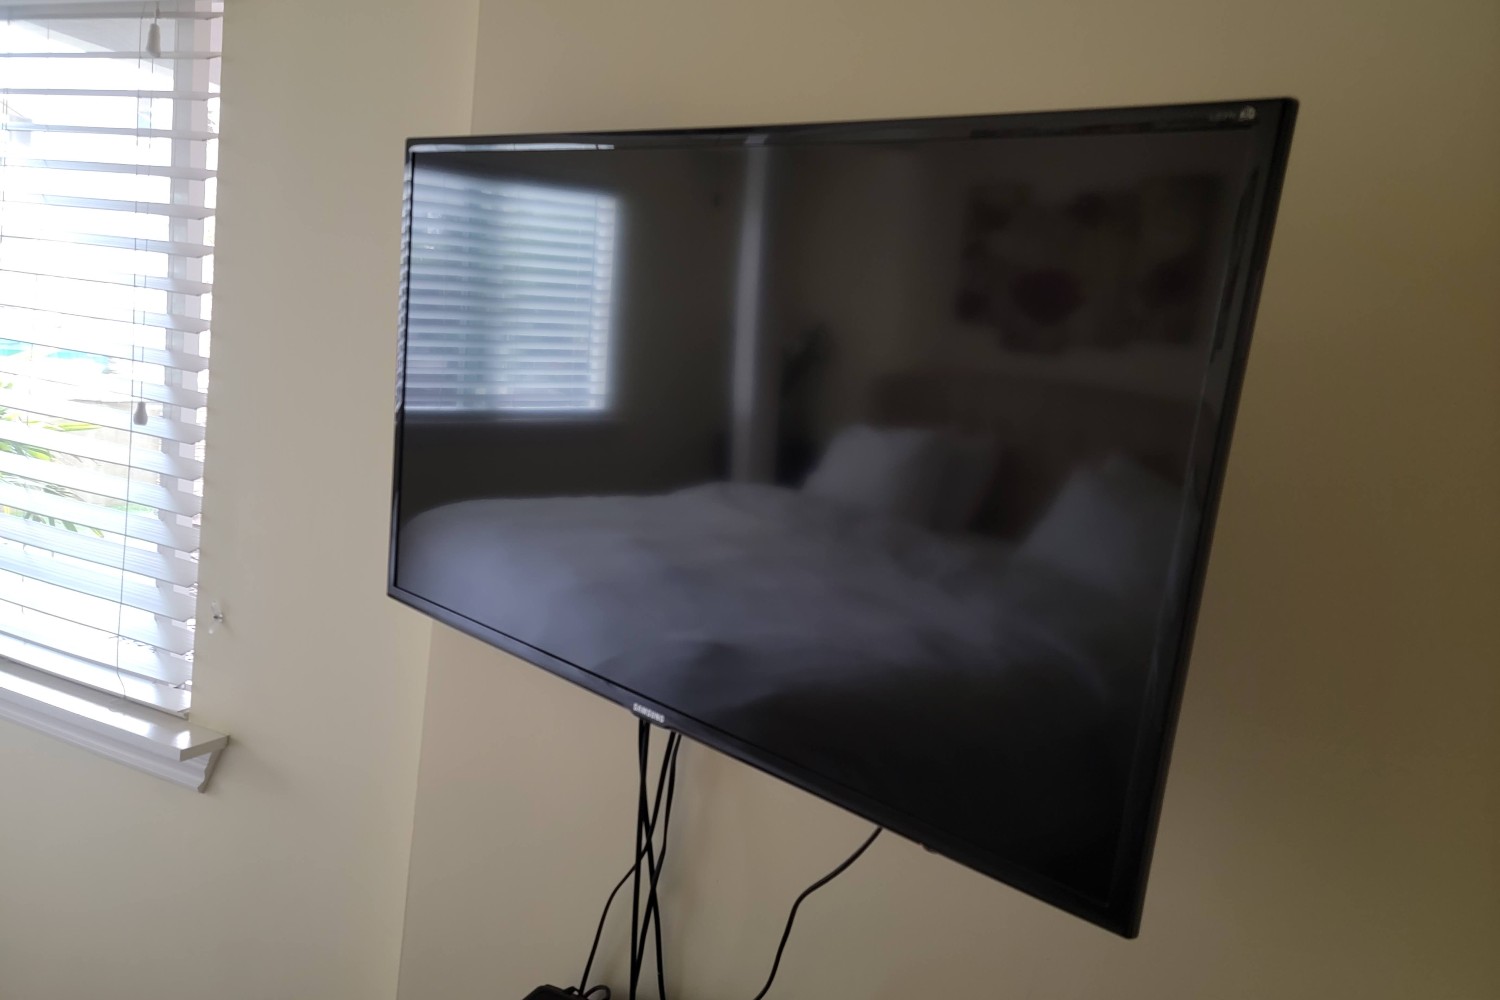 Sleeping with Your TV On: Pros and Cons